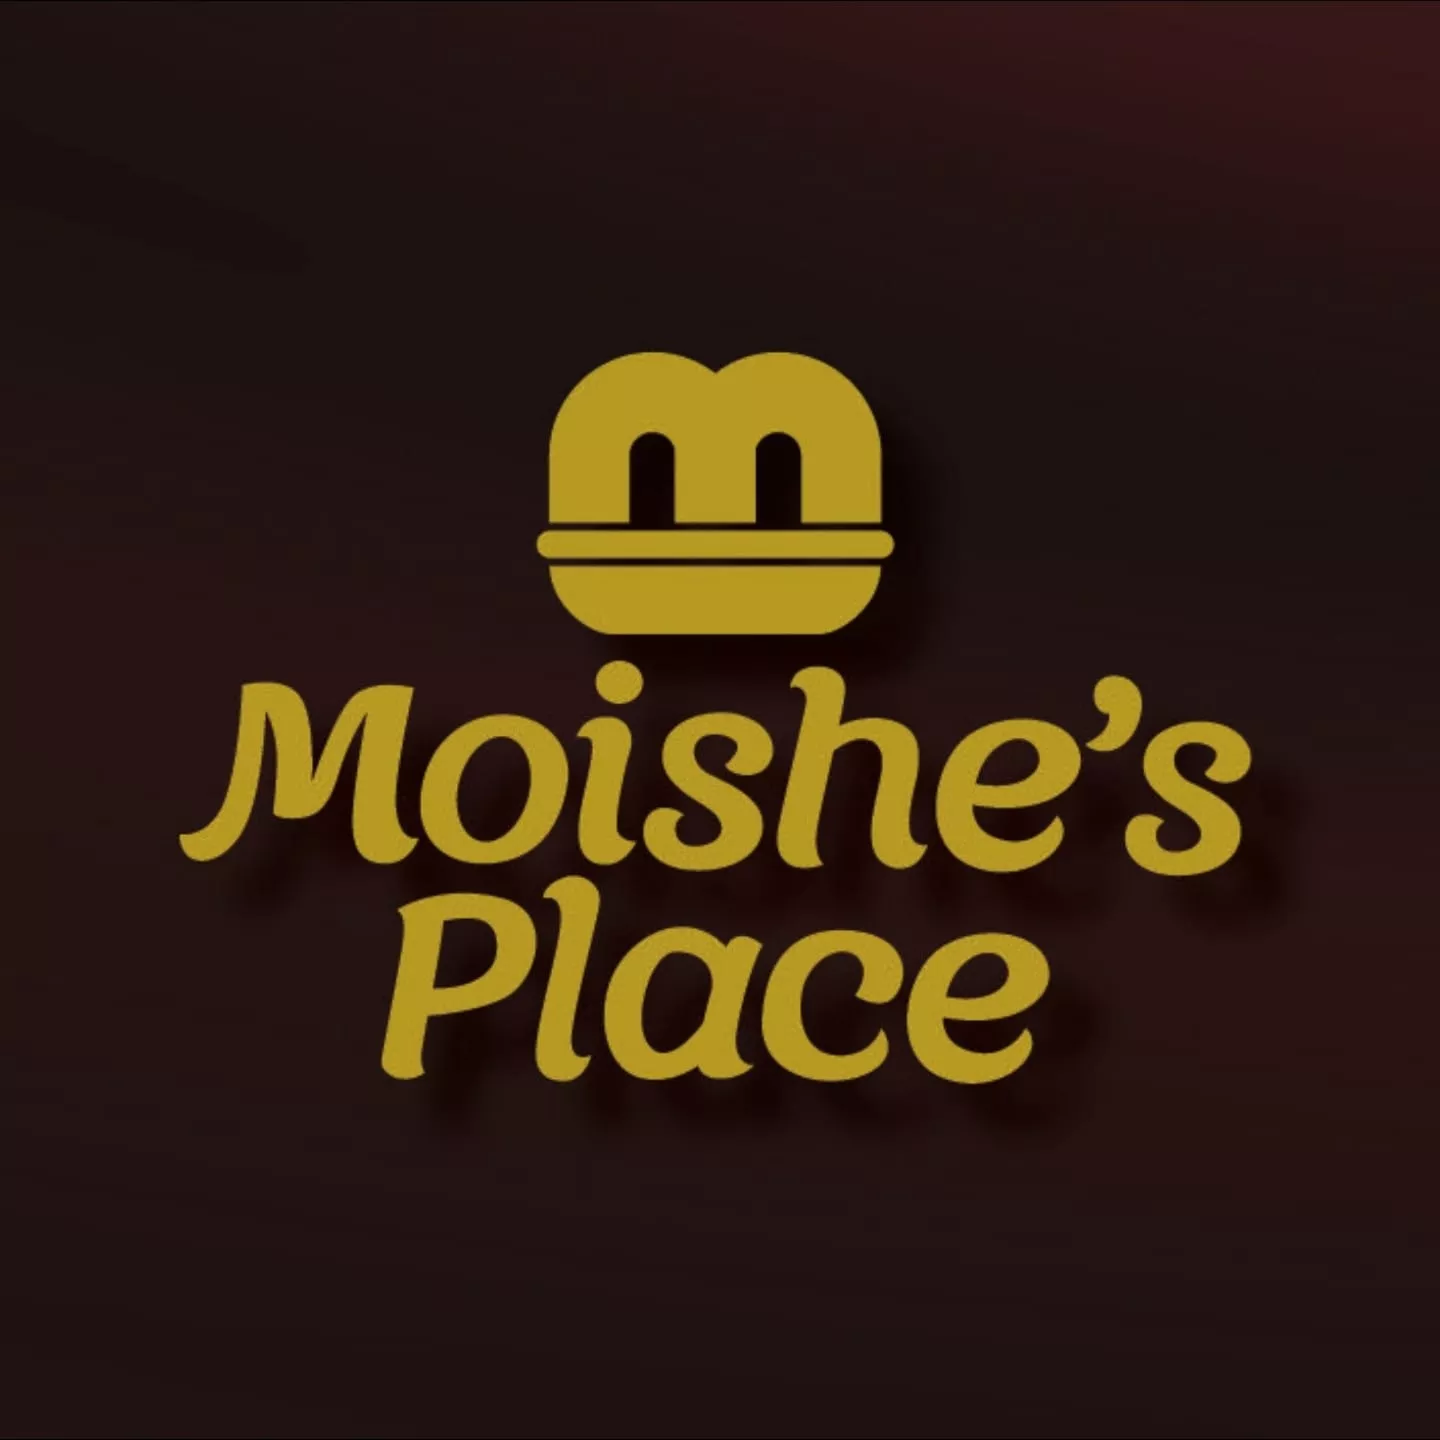 Moishe's Place Brooklyn